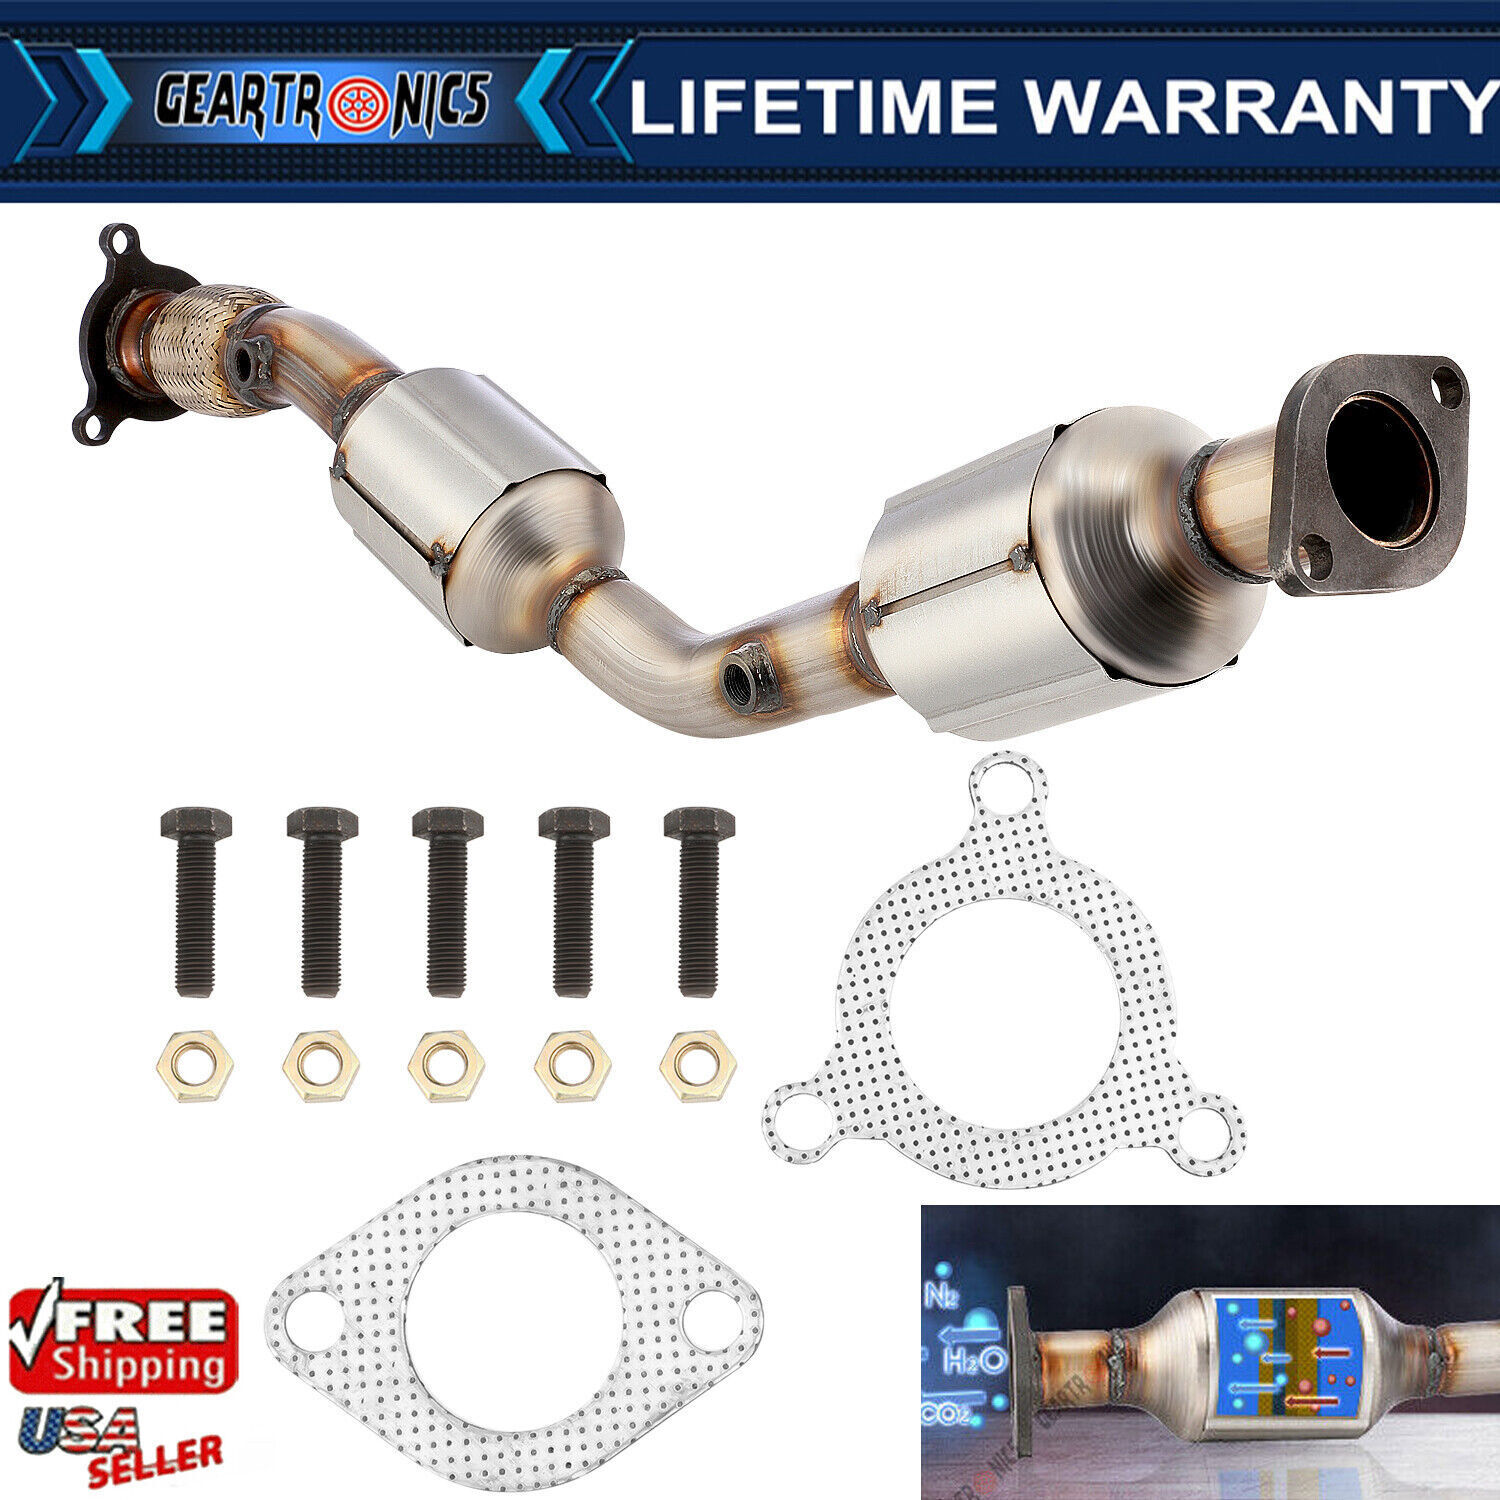 CATALYTIC CONVERTER FOR 2008 2009 2010 2011 CHEVROLET HHR 2.2L AND 2.4 US